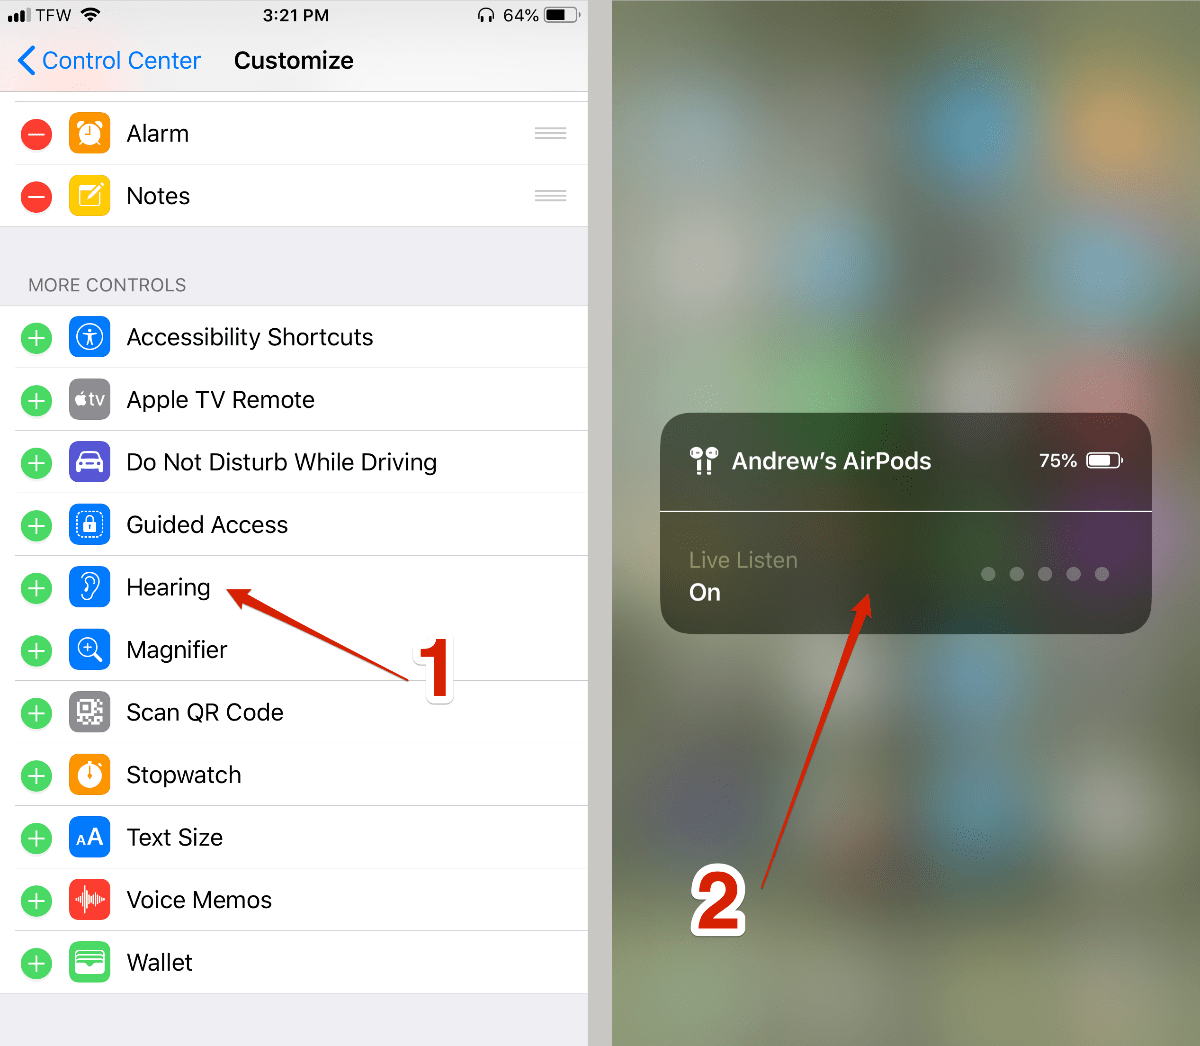 screenshots that show how to turn on live listen.